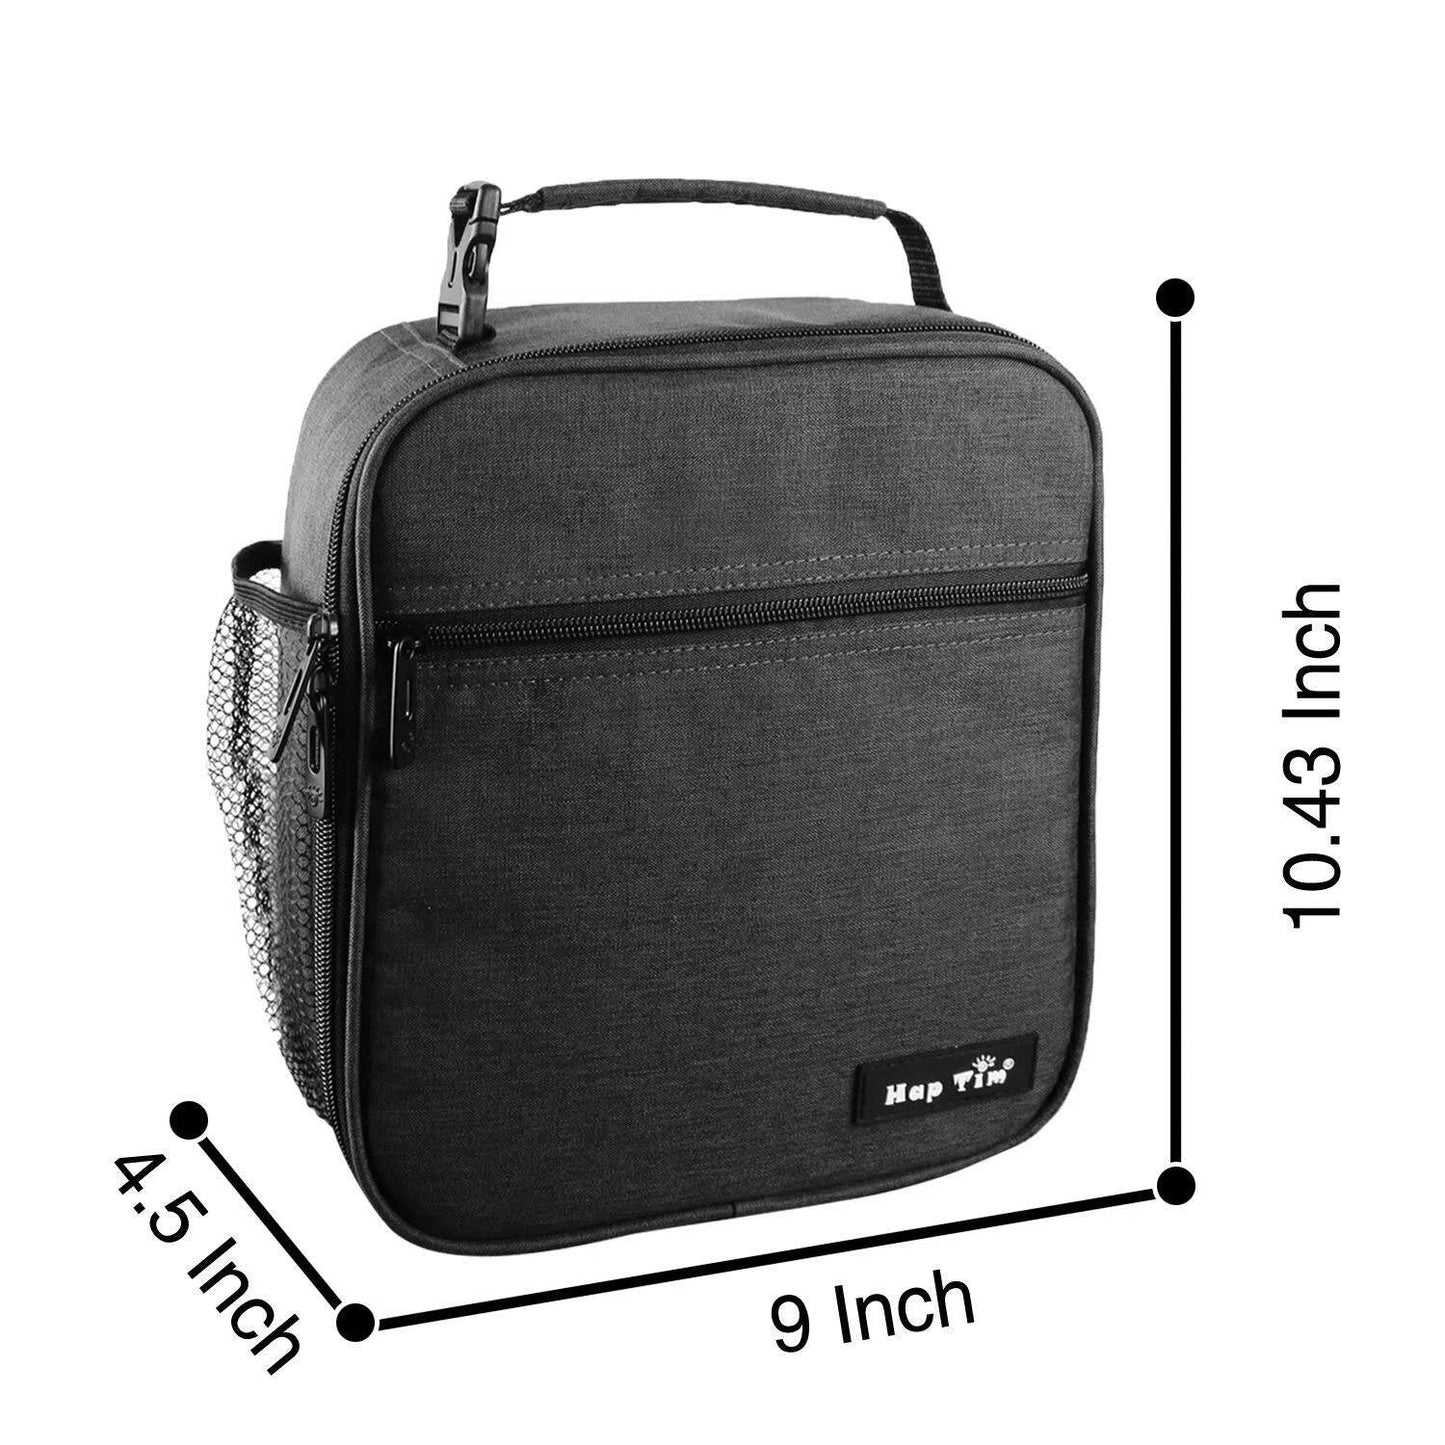 Hap Tim Insulated Lunch Bag for Men Women, Reusable Lunch Box for Kids Boys, Spacious Lunchbox Adult (18654-DG)